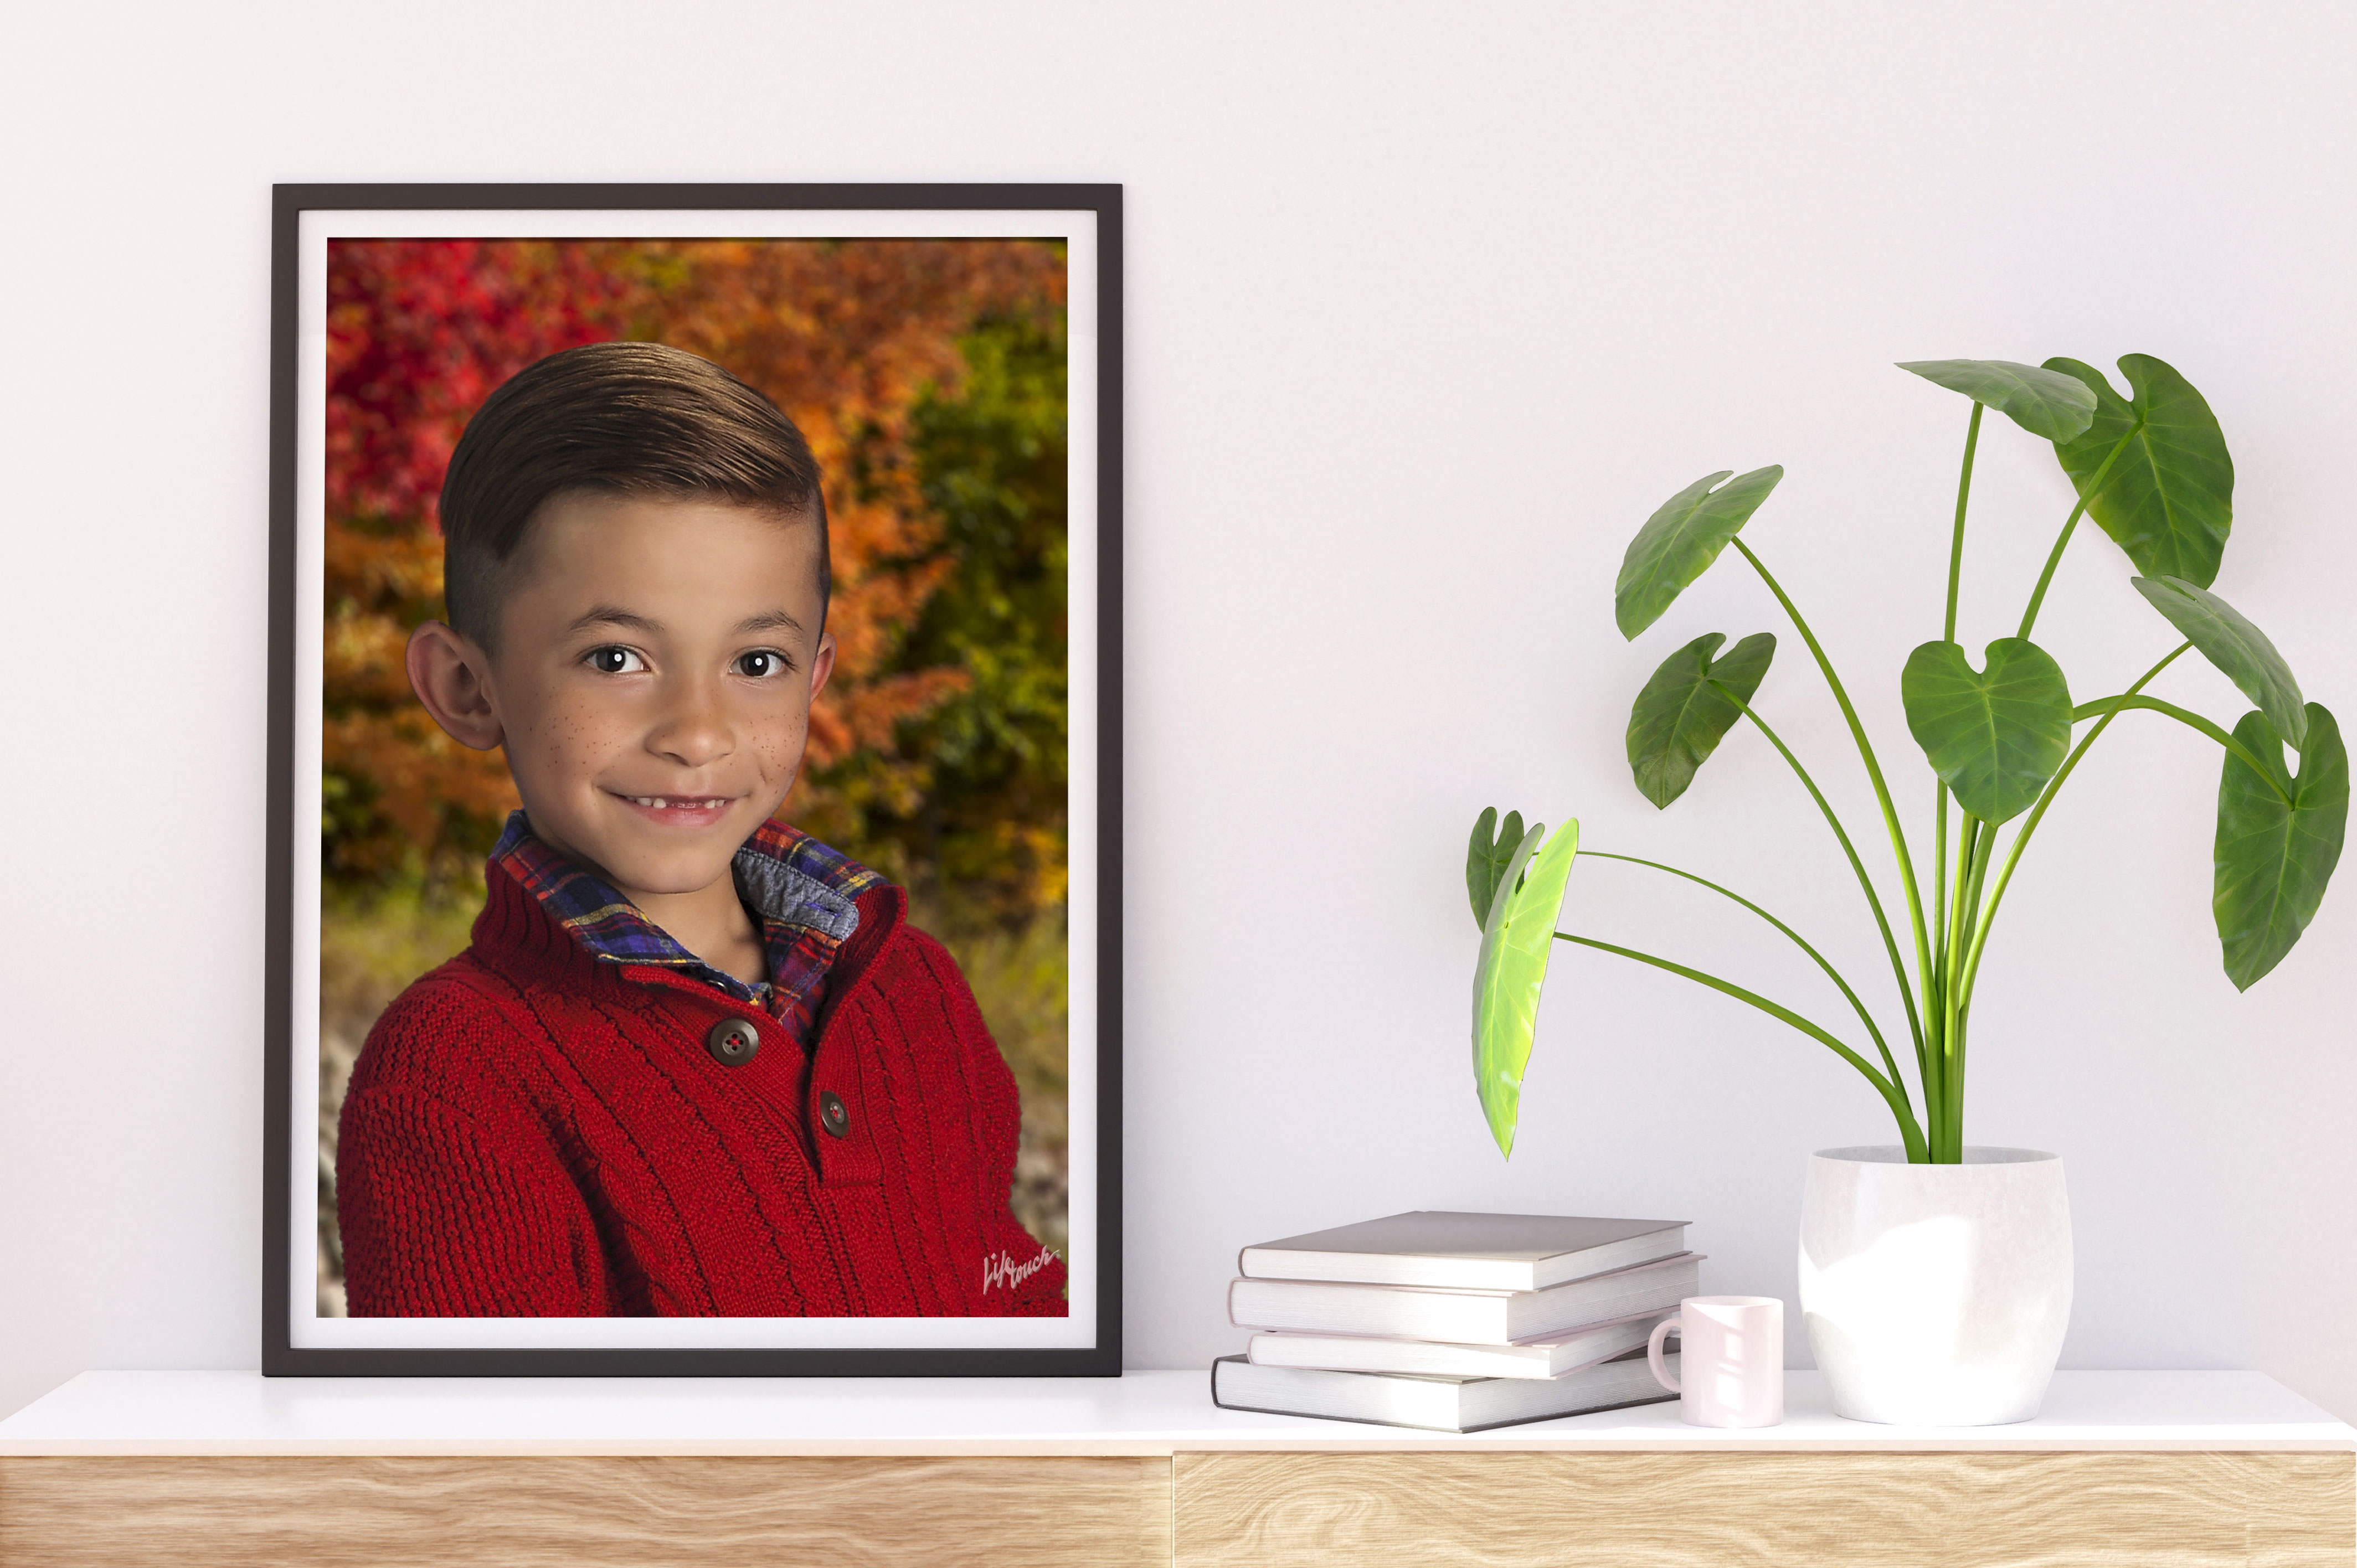 Lifetouch School photography images on wooden shelf next to plant